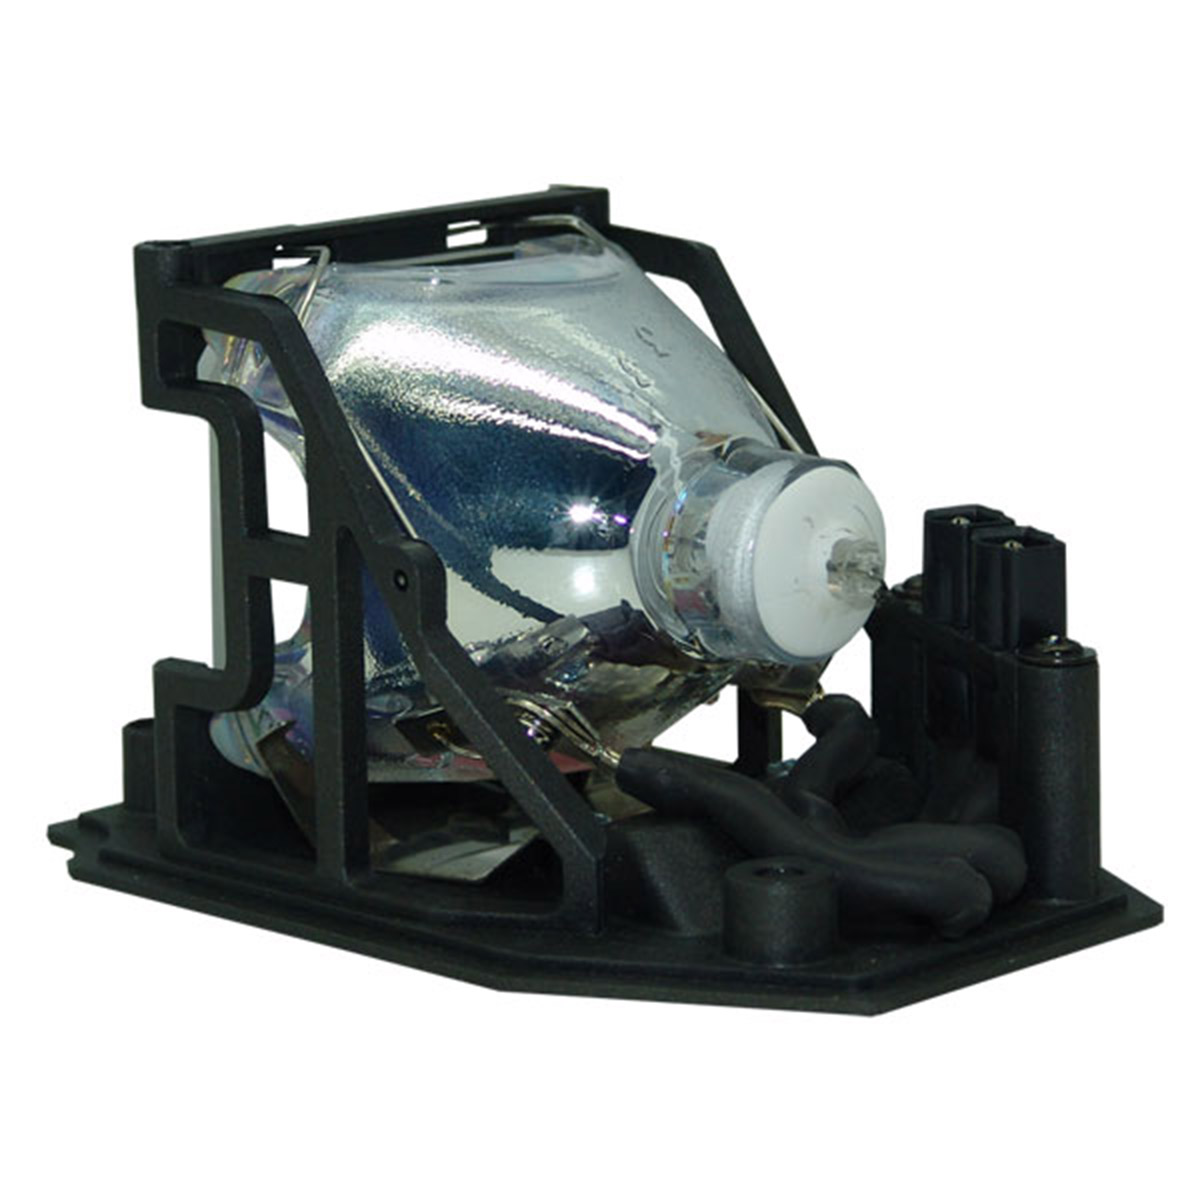 Lutema Economy for InFocus SP-LAMP-022 Projector Lamp with Housing - image 5 of 6